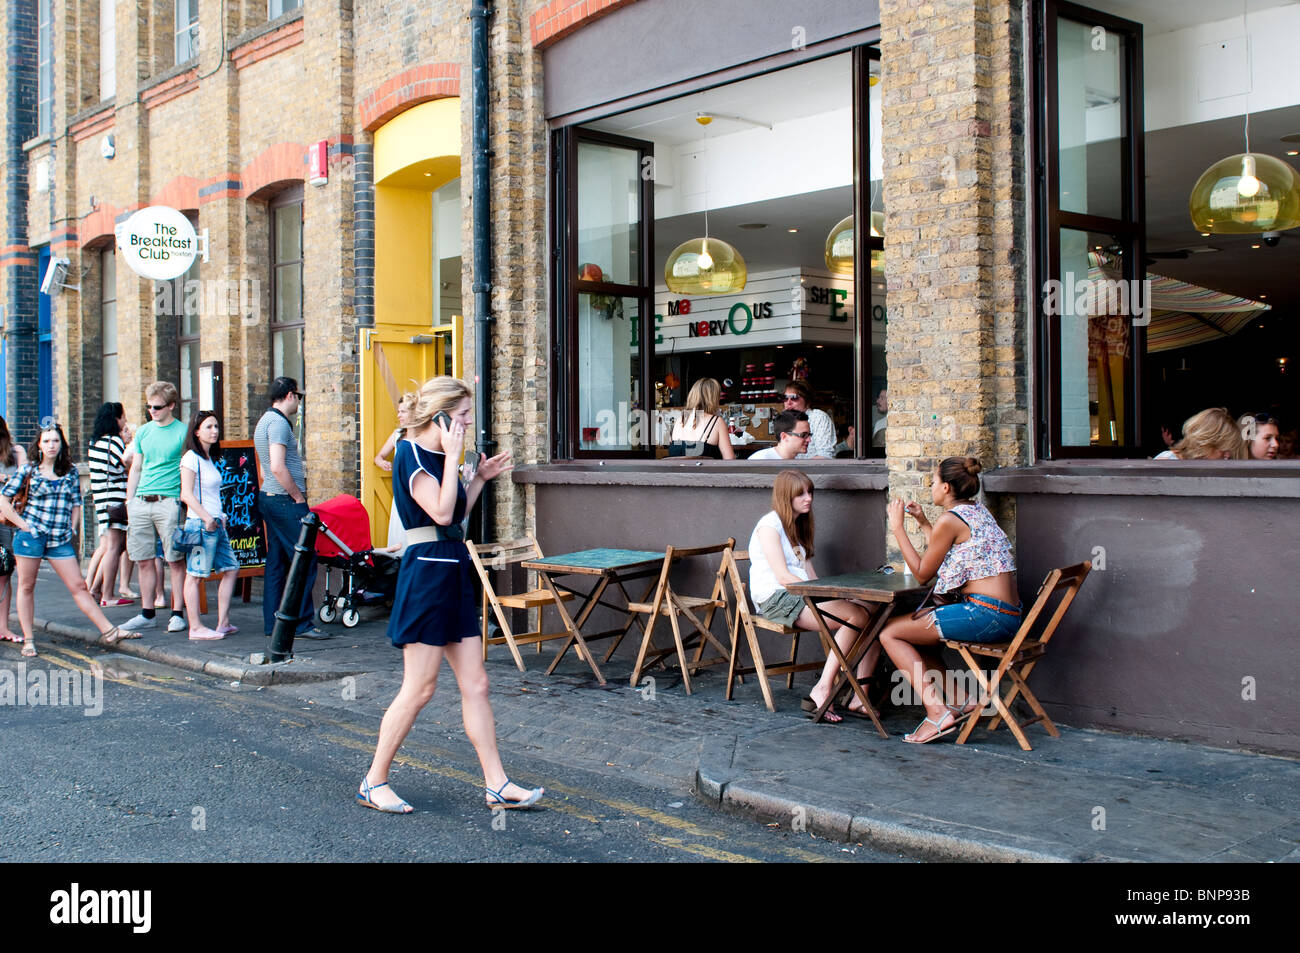 People queuing in front of The Breakfast Club restaurant, Hoxton, N1, London, UK Stock Photo